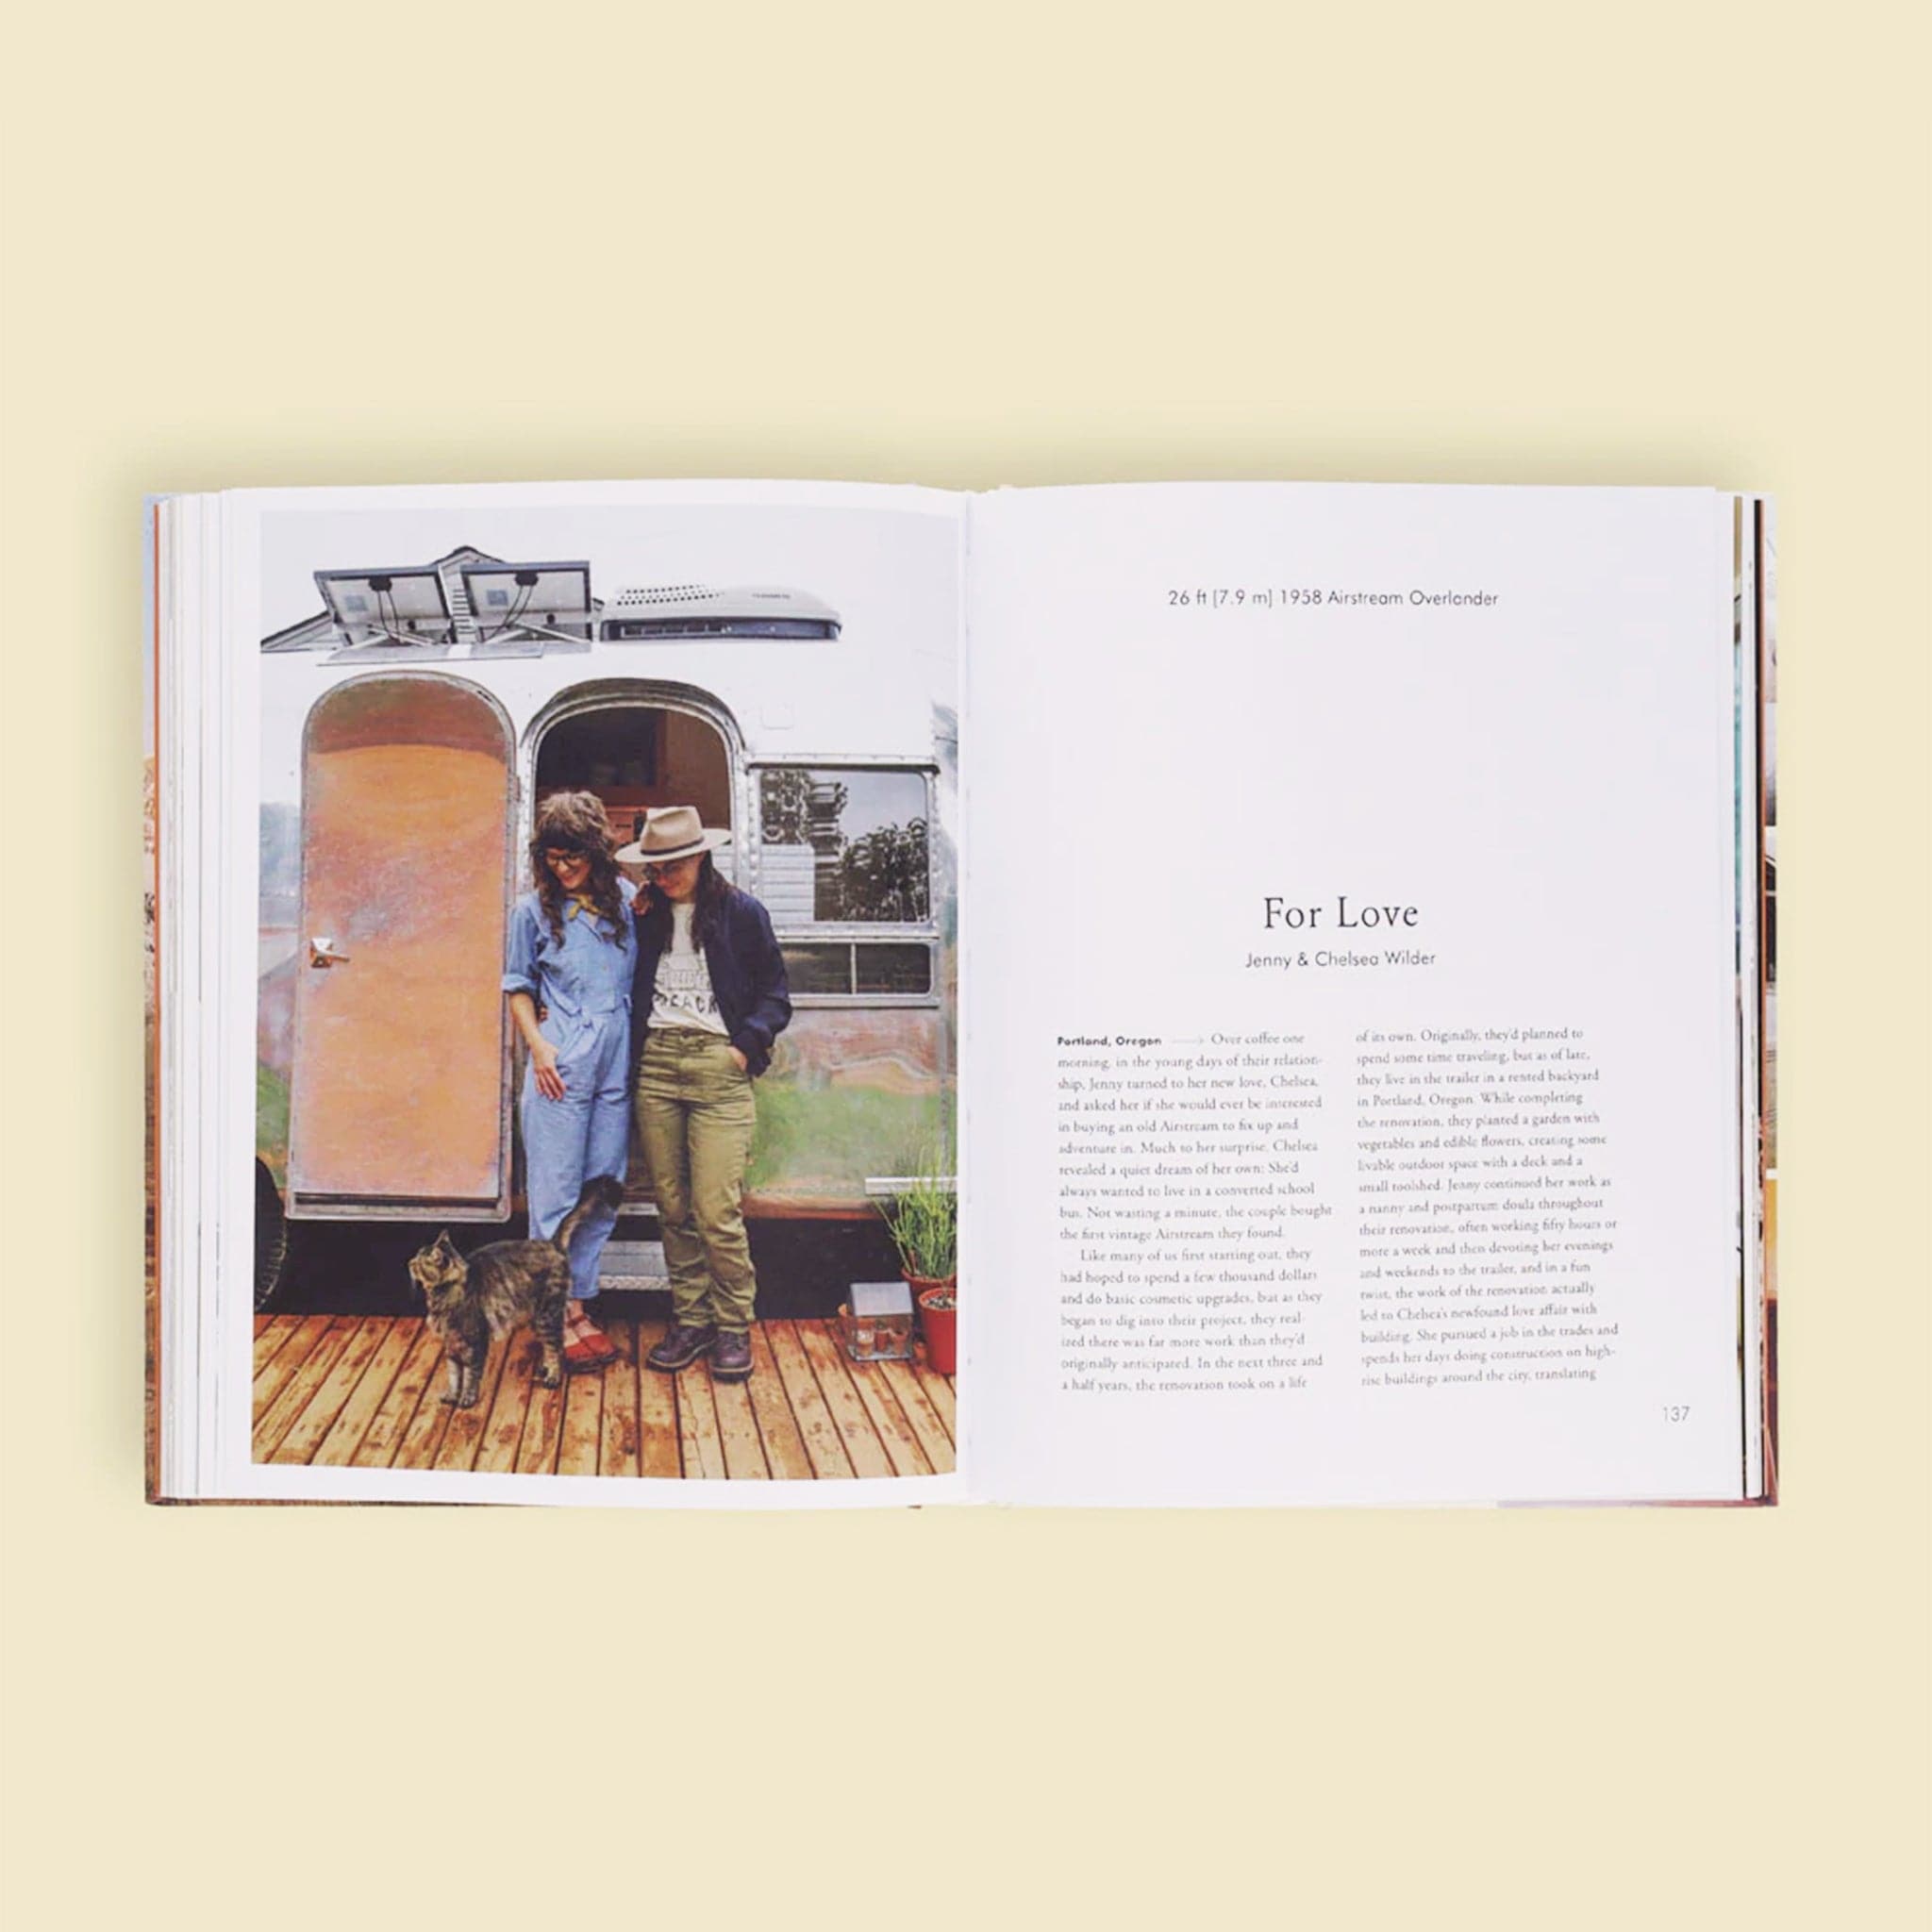 Two open pages of the book. The left page is filled with a sweet couple looking down at their long haired cat, posed in front of their silver airstream trailer. The right page is titles 'For Love' and dives into the story of Jenny and Chelsea Wilder against a solid white page. 